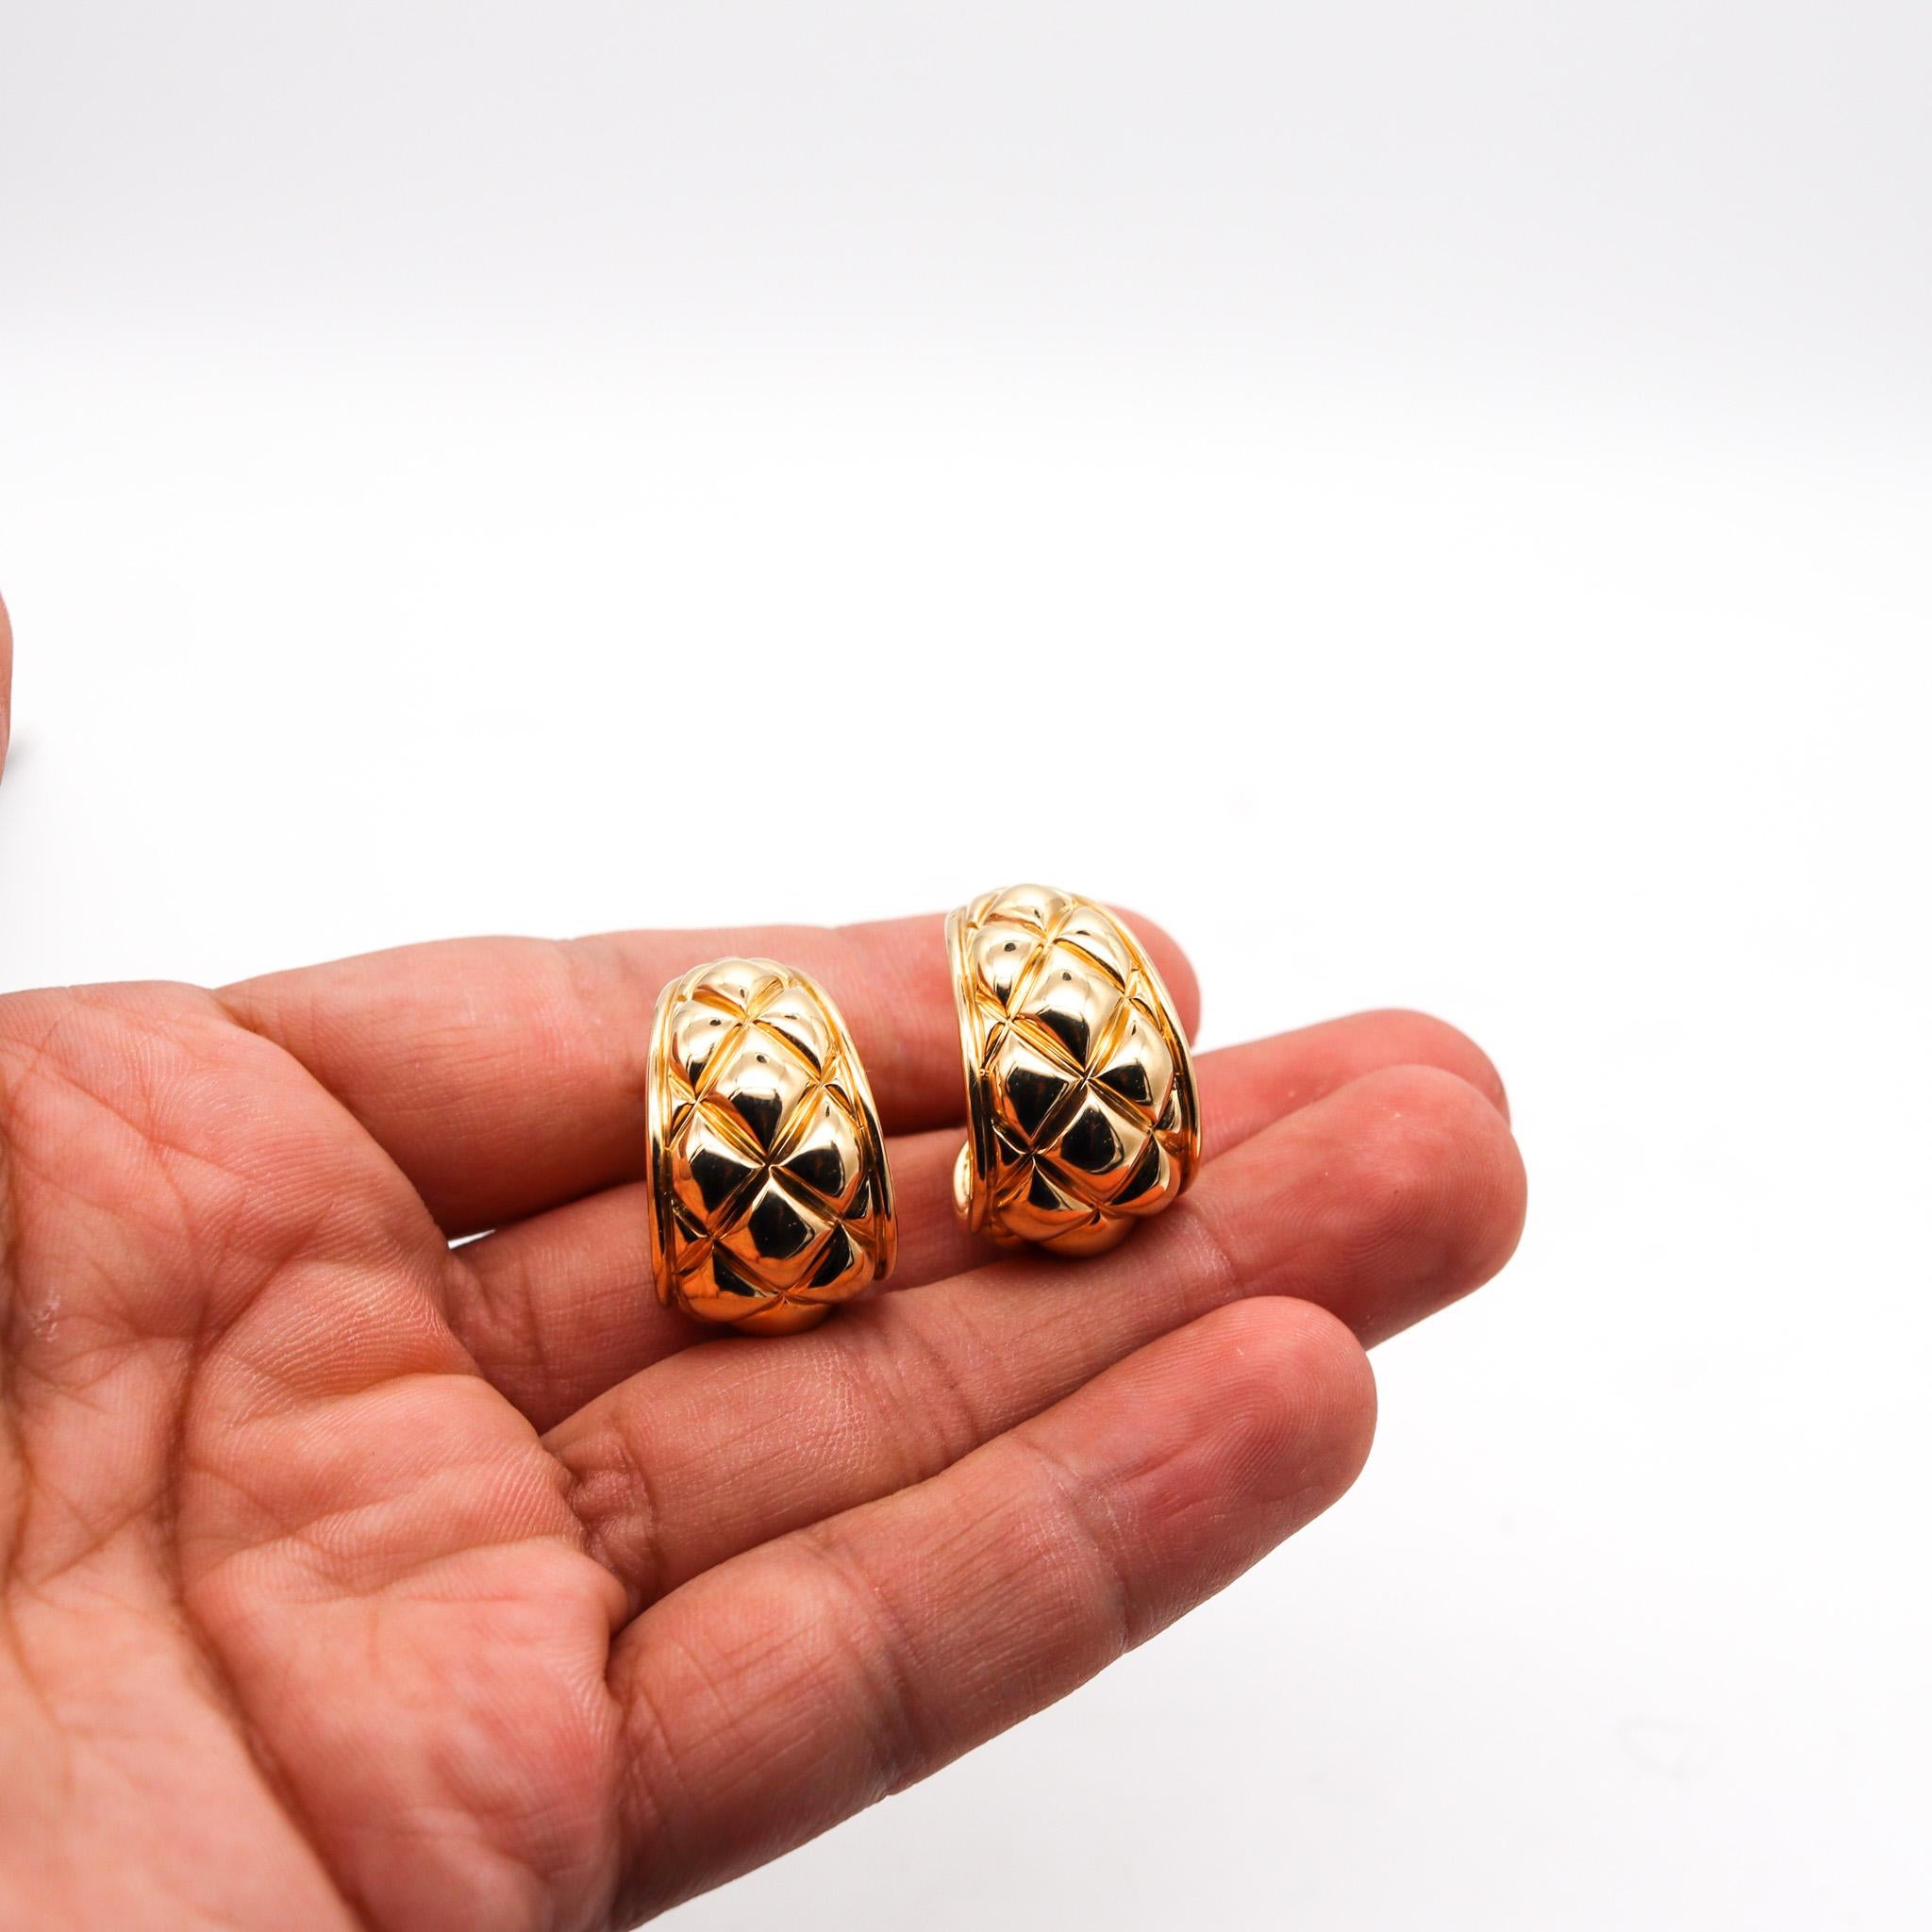 Women's Chaumet Paris 1970 Quilted Modernist Hoops Earrings in Solid 18kt Yellow Gold For Sale